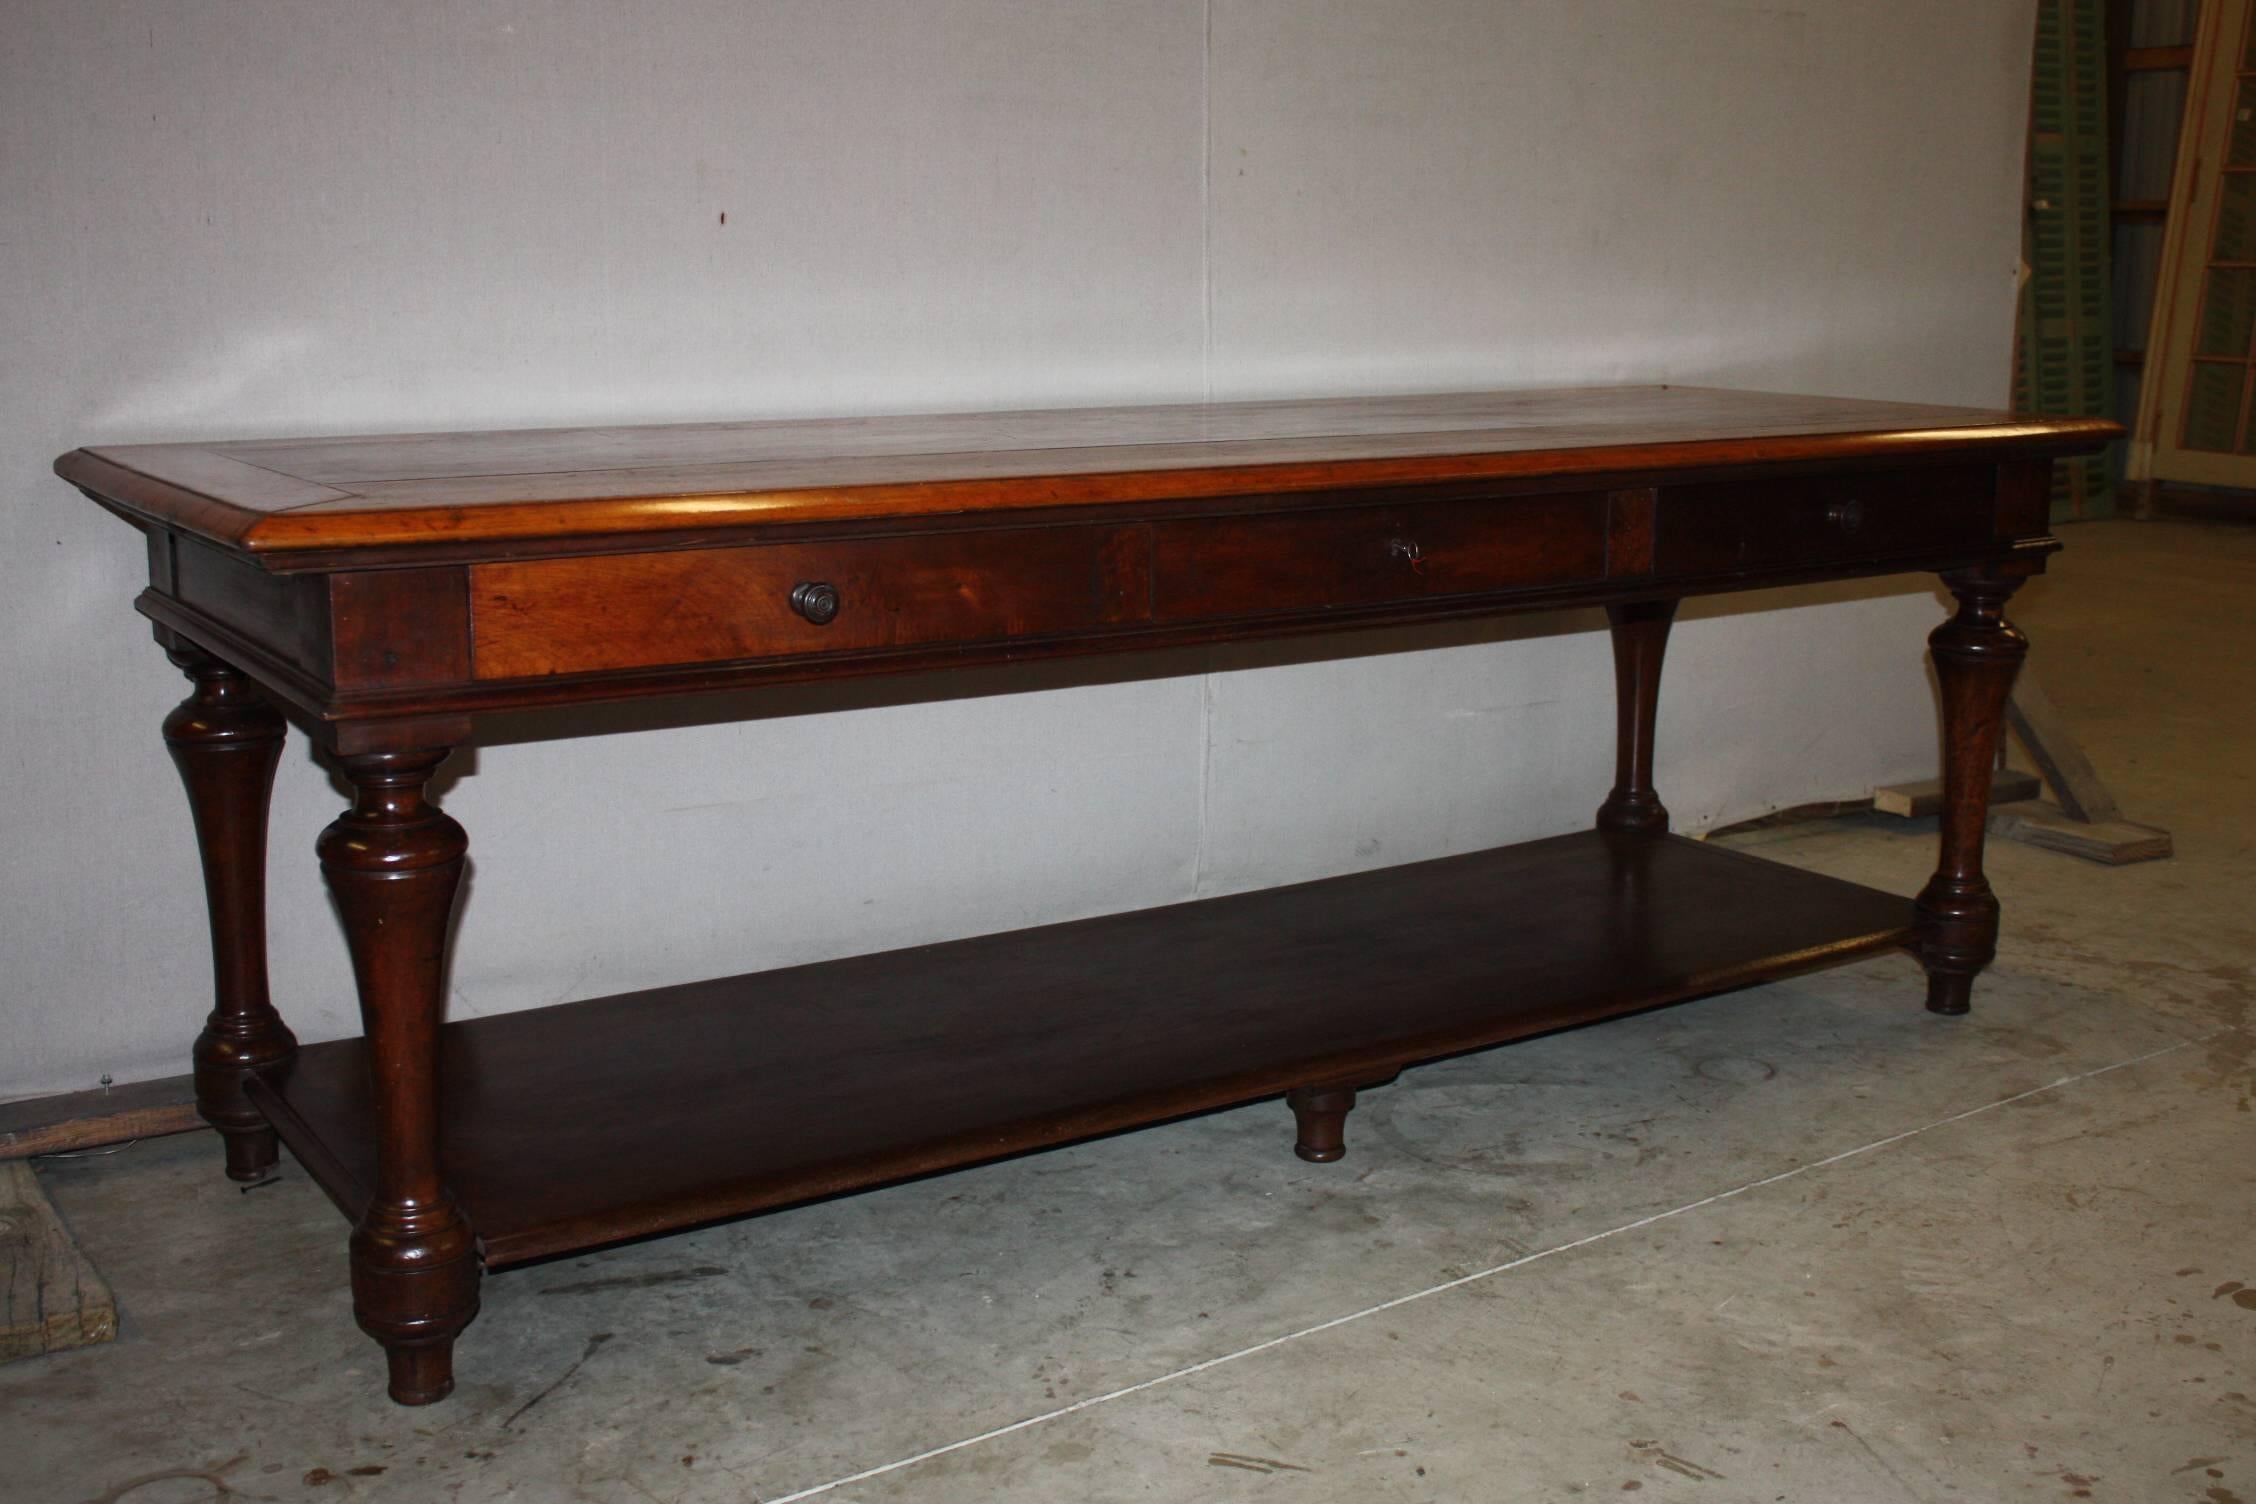 This rare French stained pine table was originally used in a drapers' Haberdashery shop for measuring lengths of fabric. It's beautiful from all sides and would be the perfect kitchen island. All legs are detailed turned pine and feature a bottom